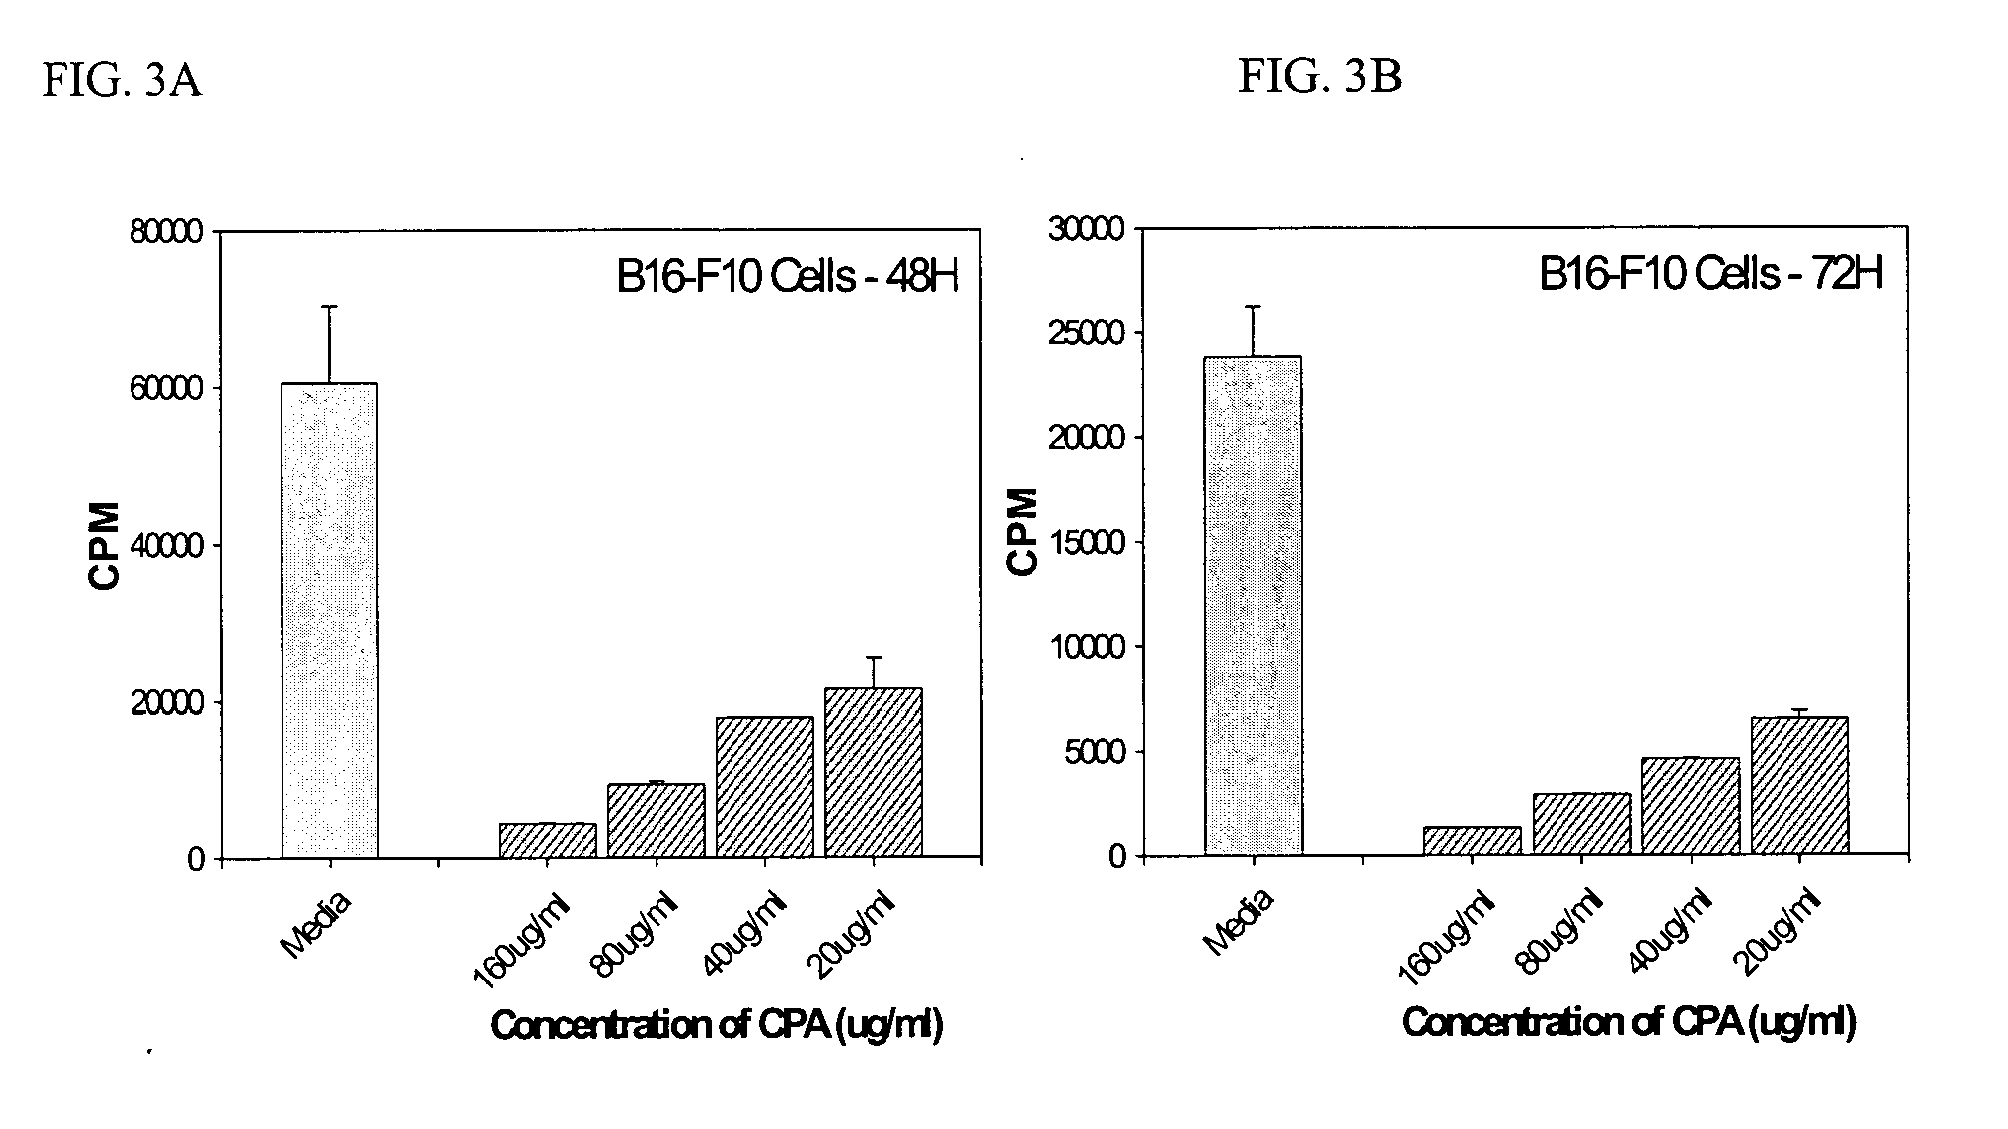 Canola Extracts Containing High Levels of Phenolic Acids